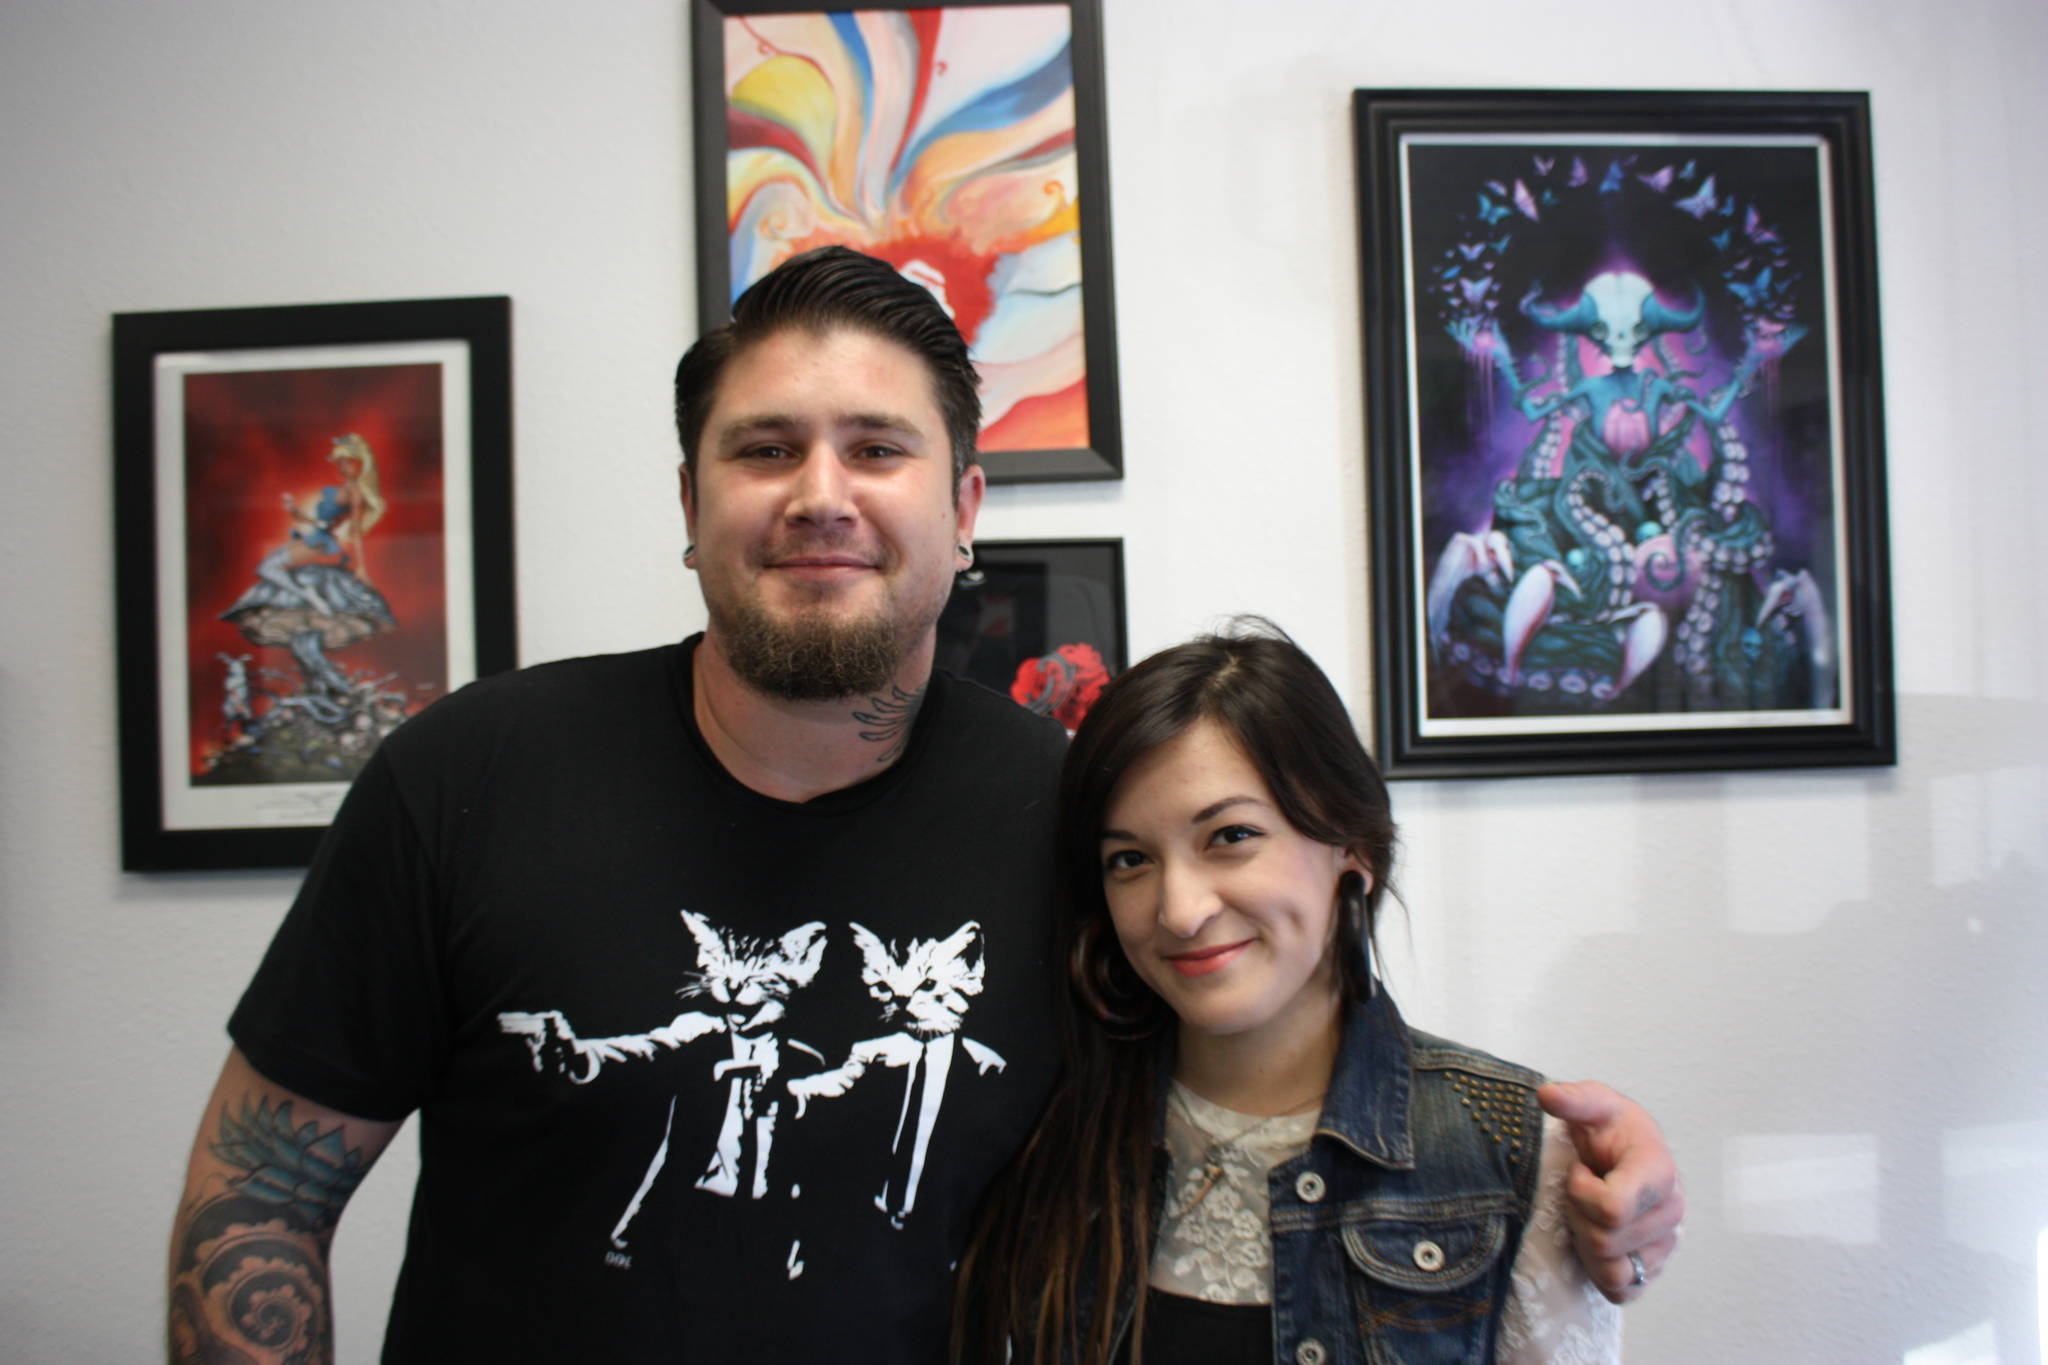 Conor Moore, left, and Tai-Li Lynn are the artists at Eastside Tattoo parlor in Redmond. Aaron Kunkler/Redmond Reporter